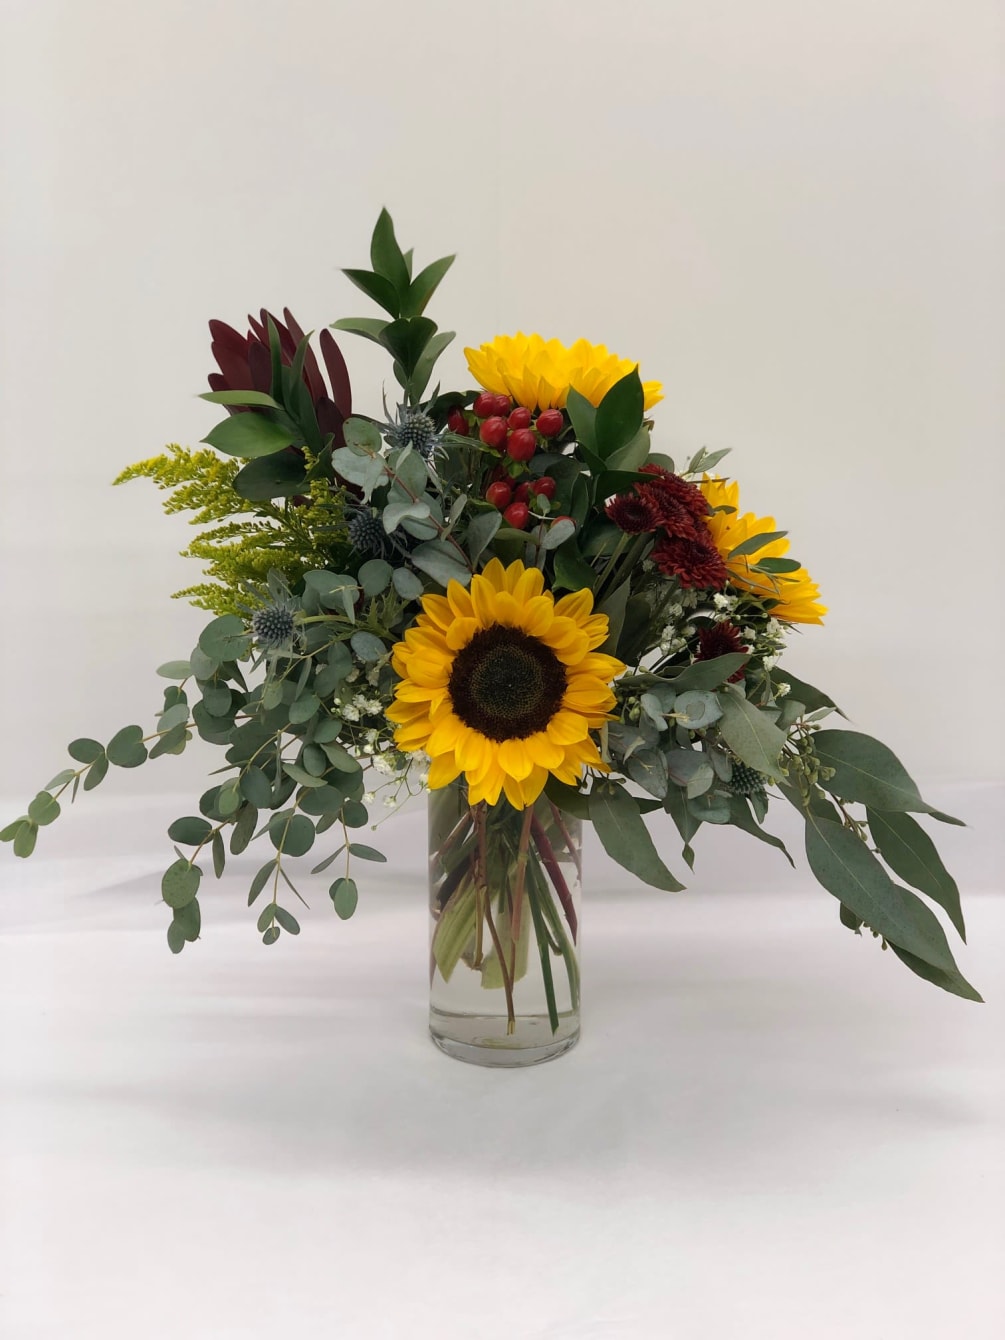 Organic arrangement of mainly assorted greenery with a touch of sunflowers, mums